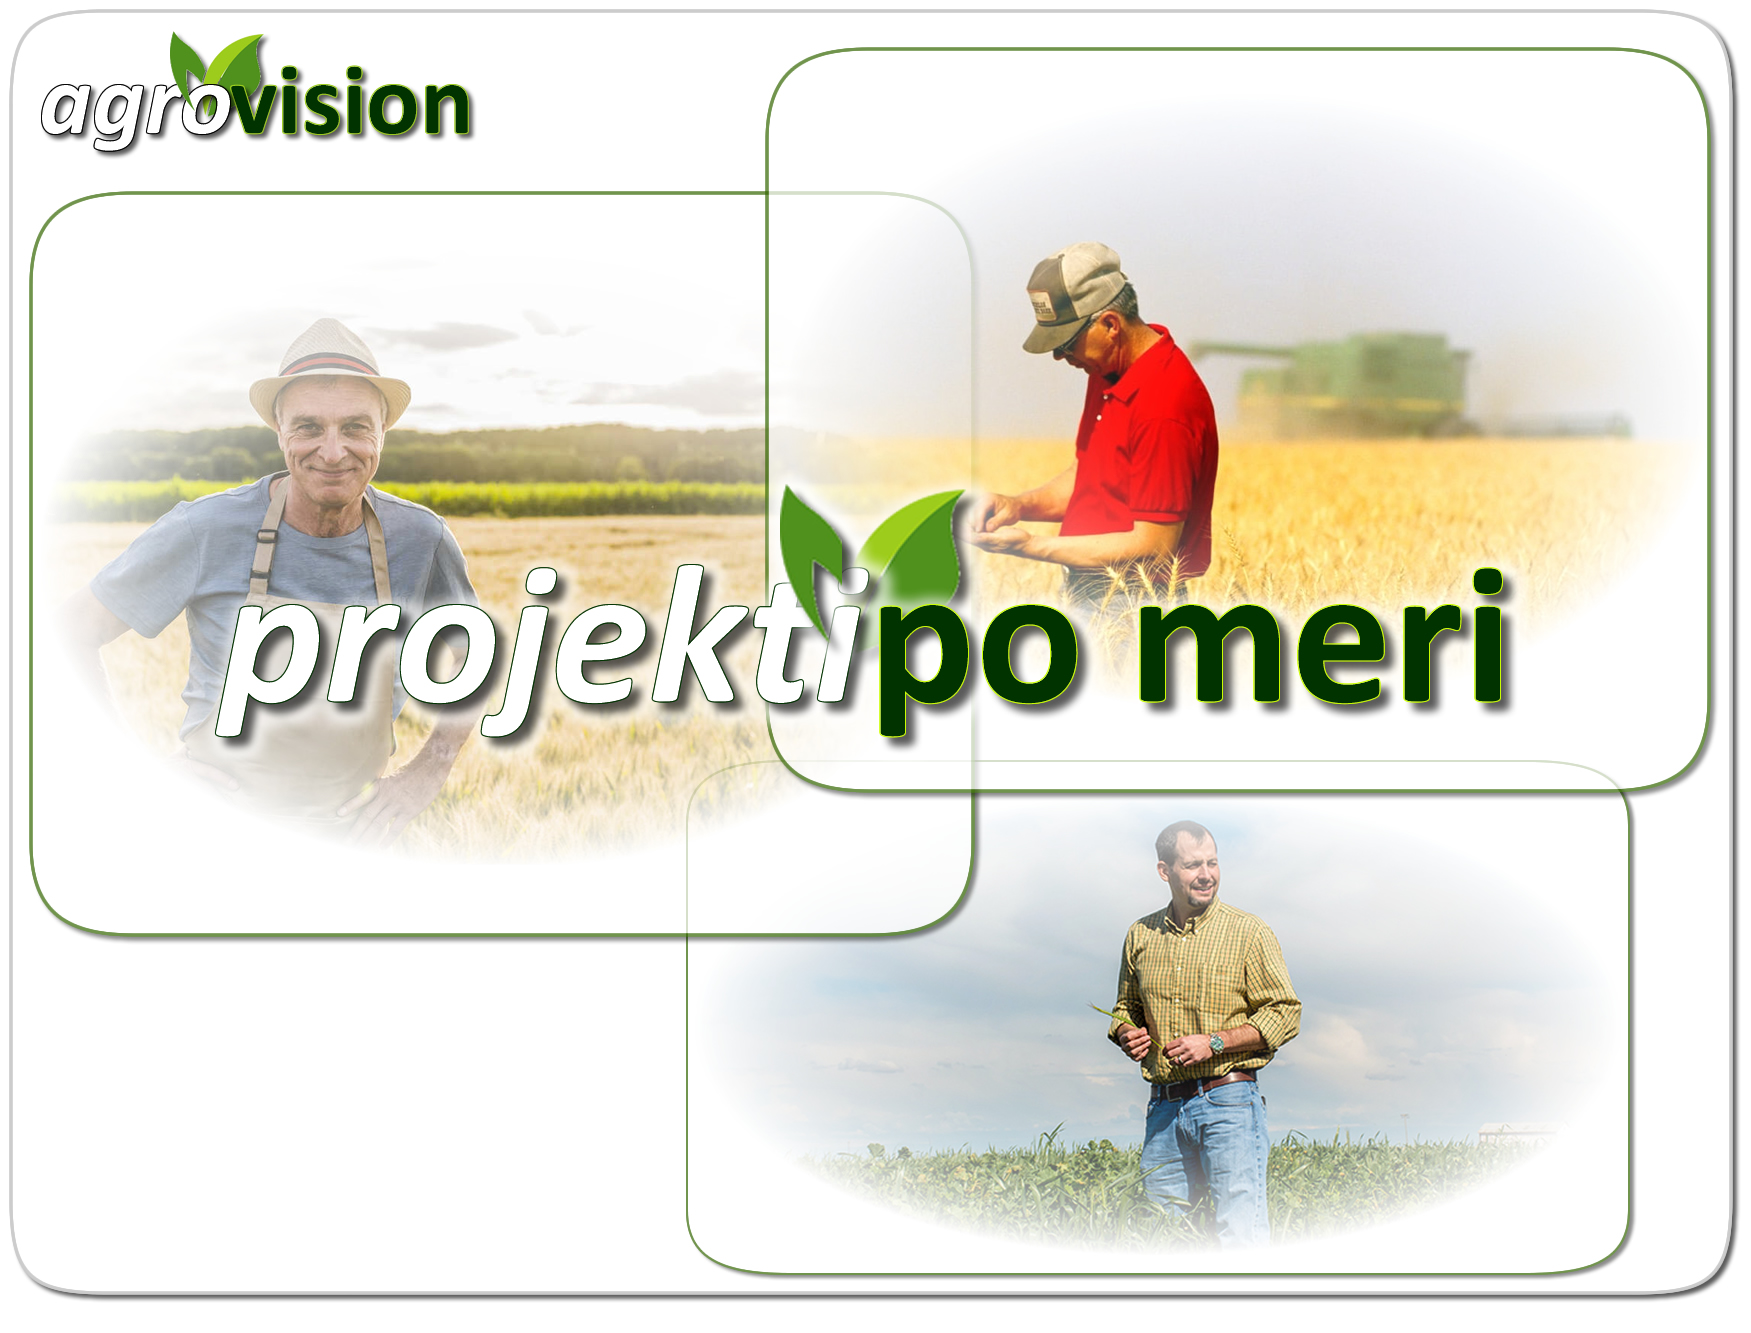 agrivision